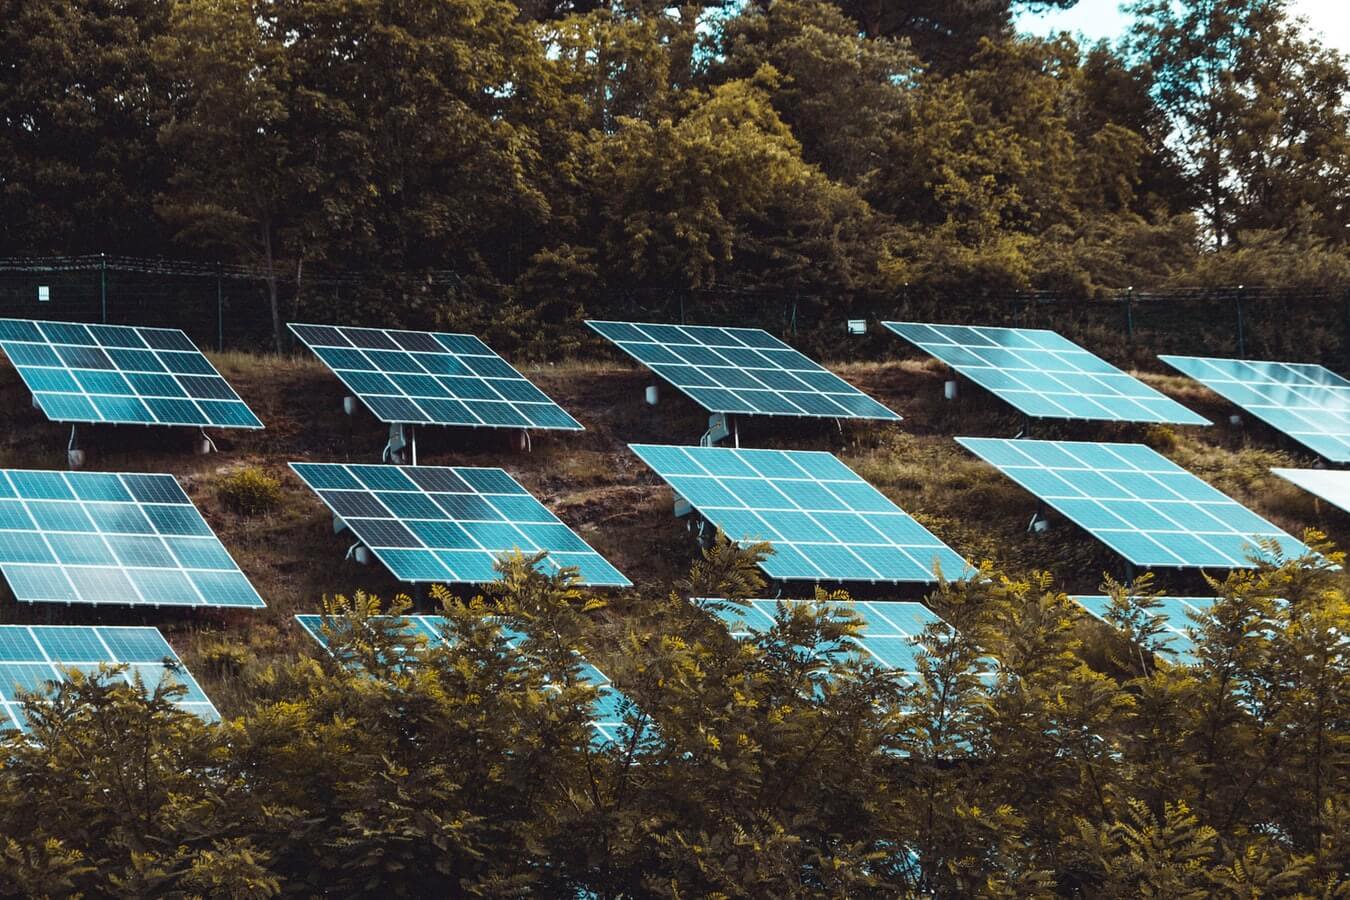 A commercial solar installation on a roof surrounded by trees